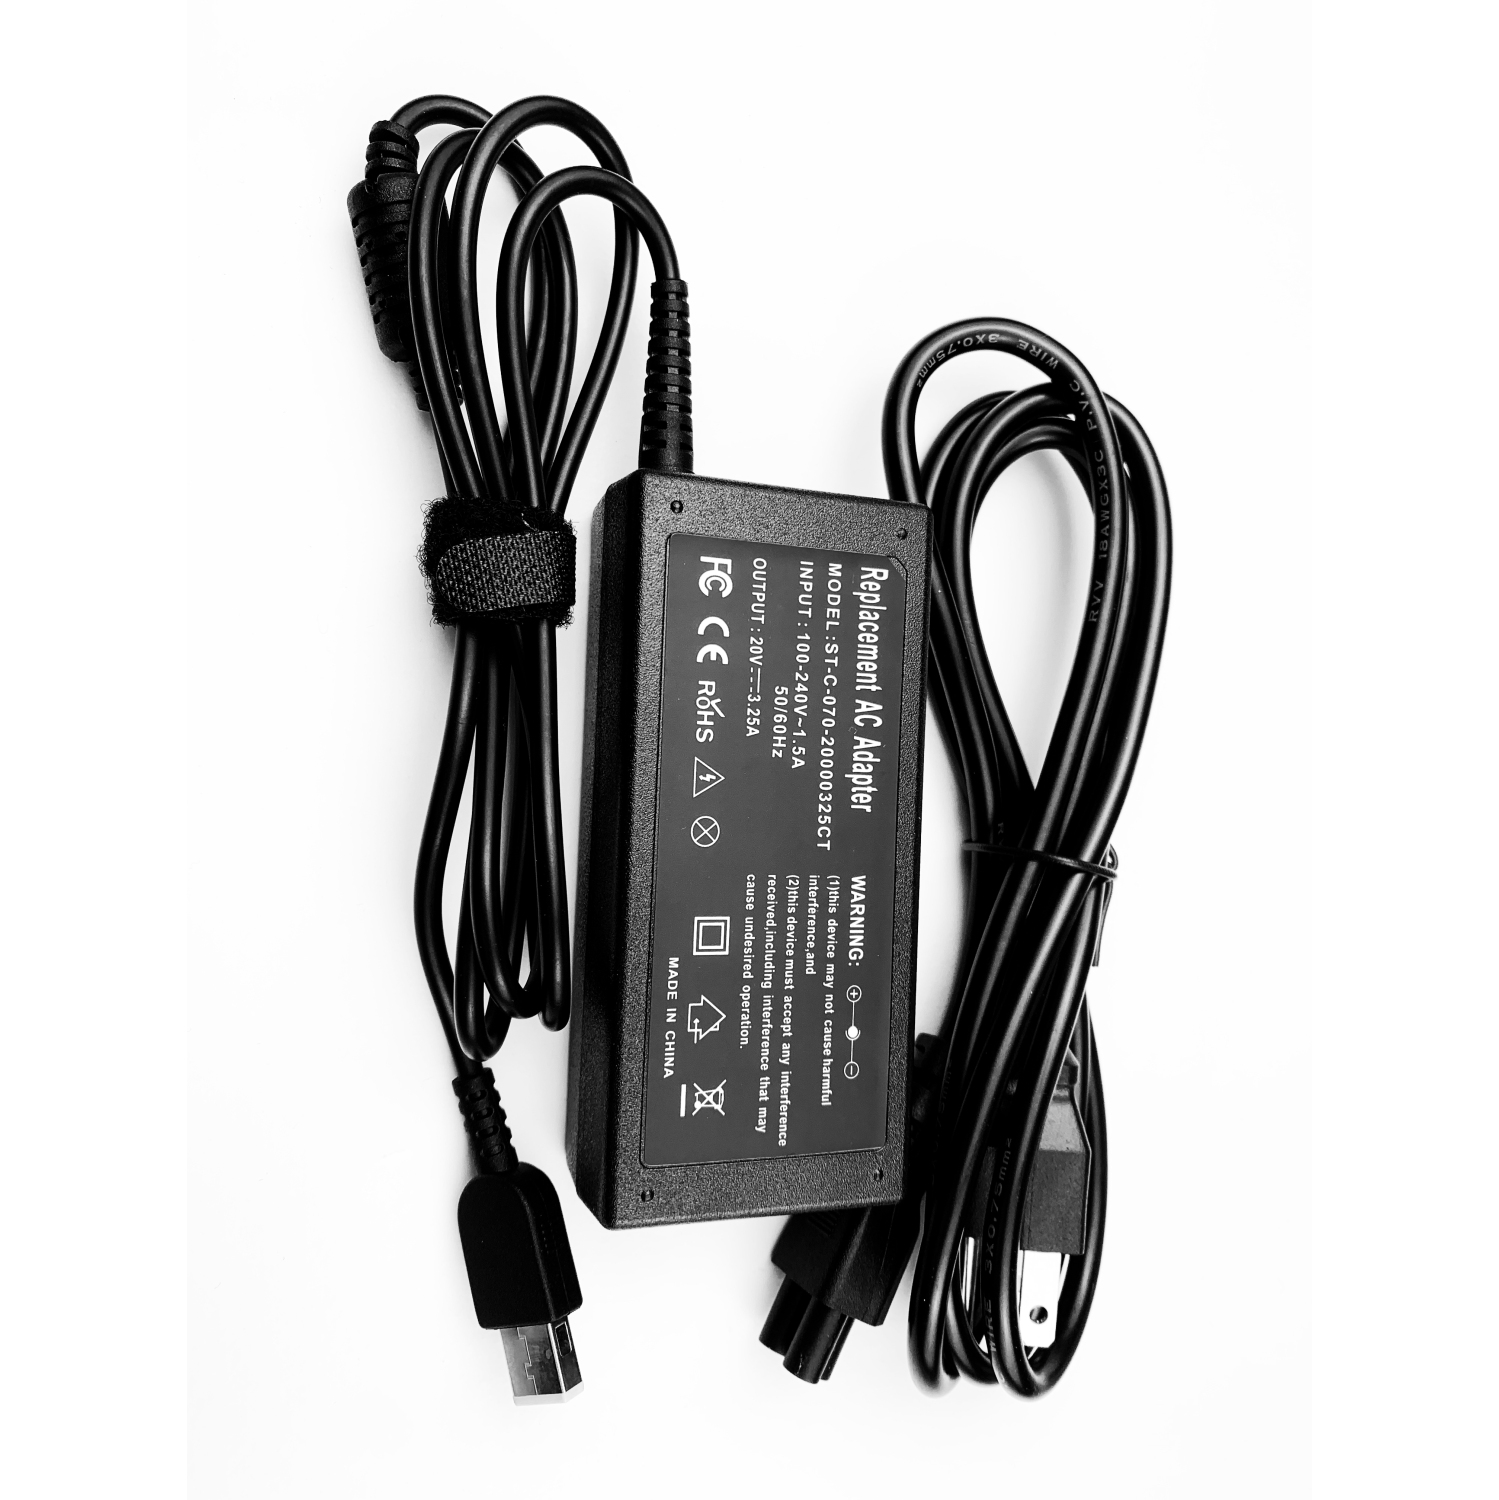 20V 3.25A yellow square tip 65W AC adapter power cord charger for Lenovo P/N 01FR054 Yoga Tablet 2 10""